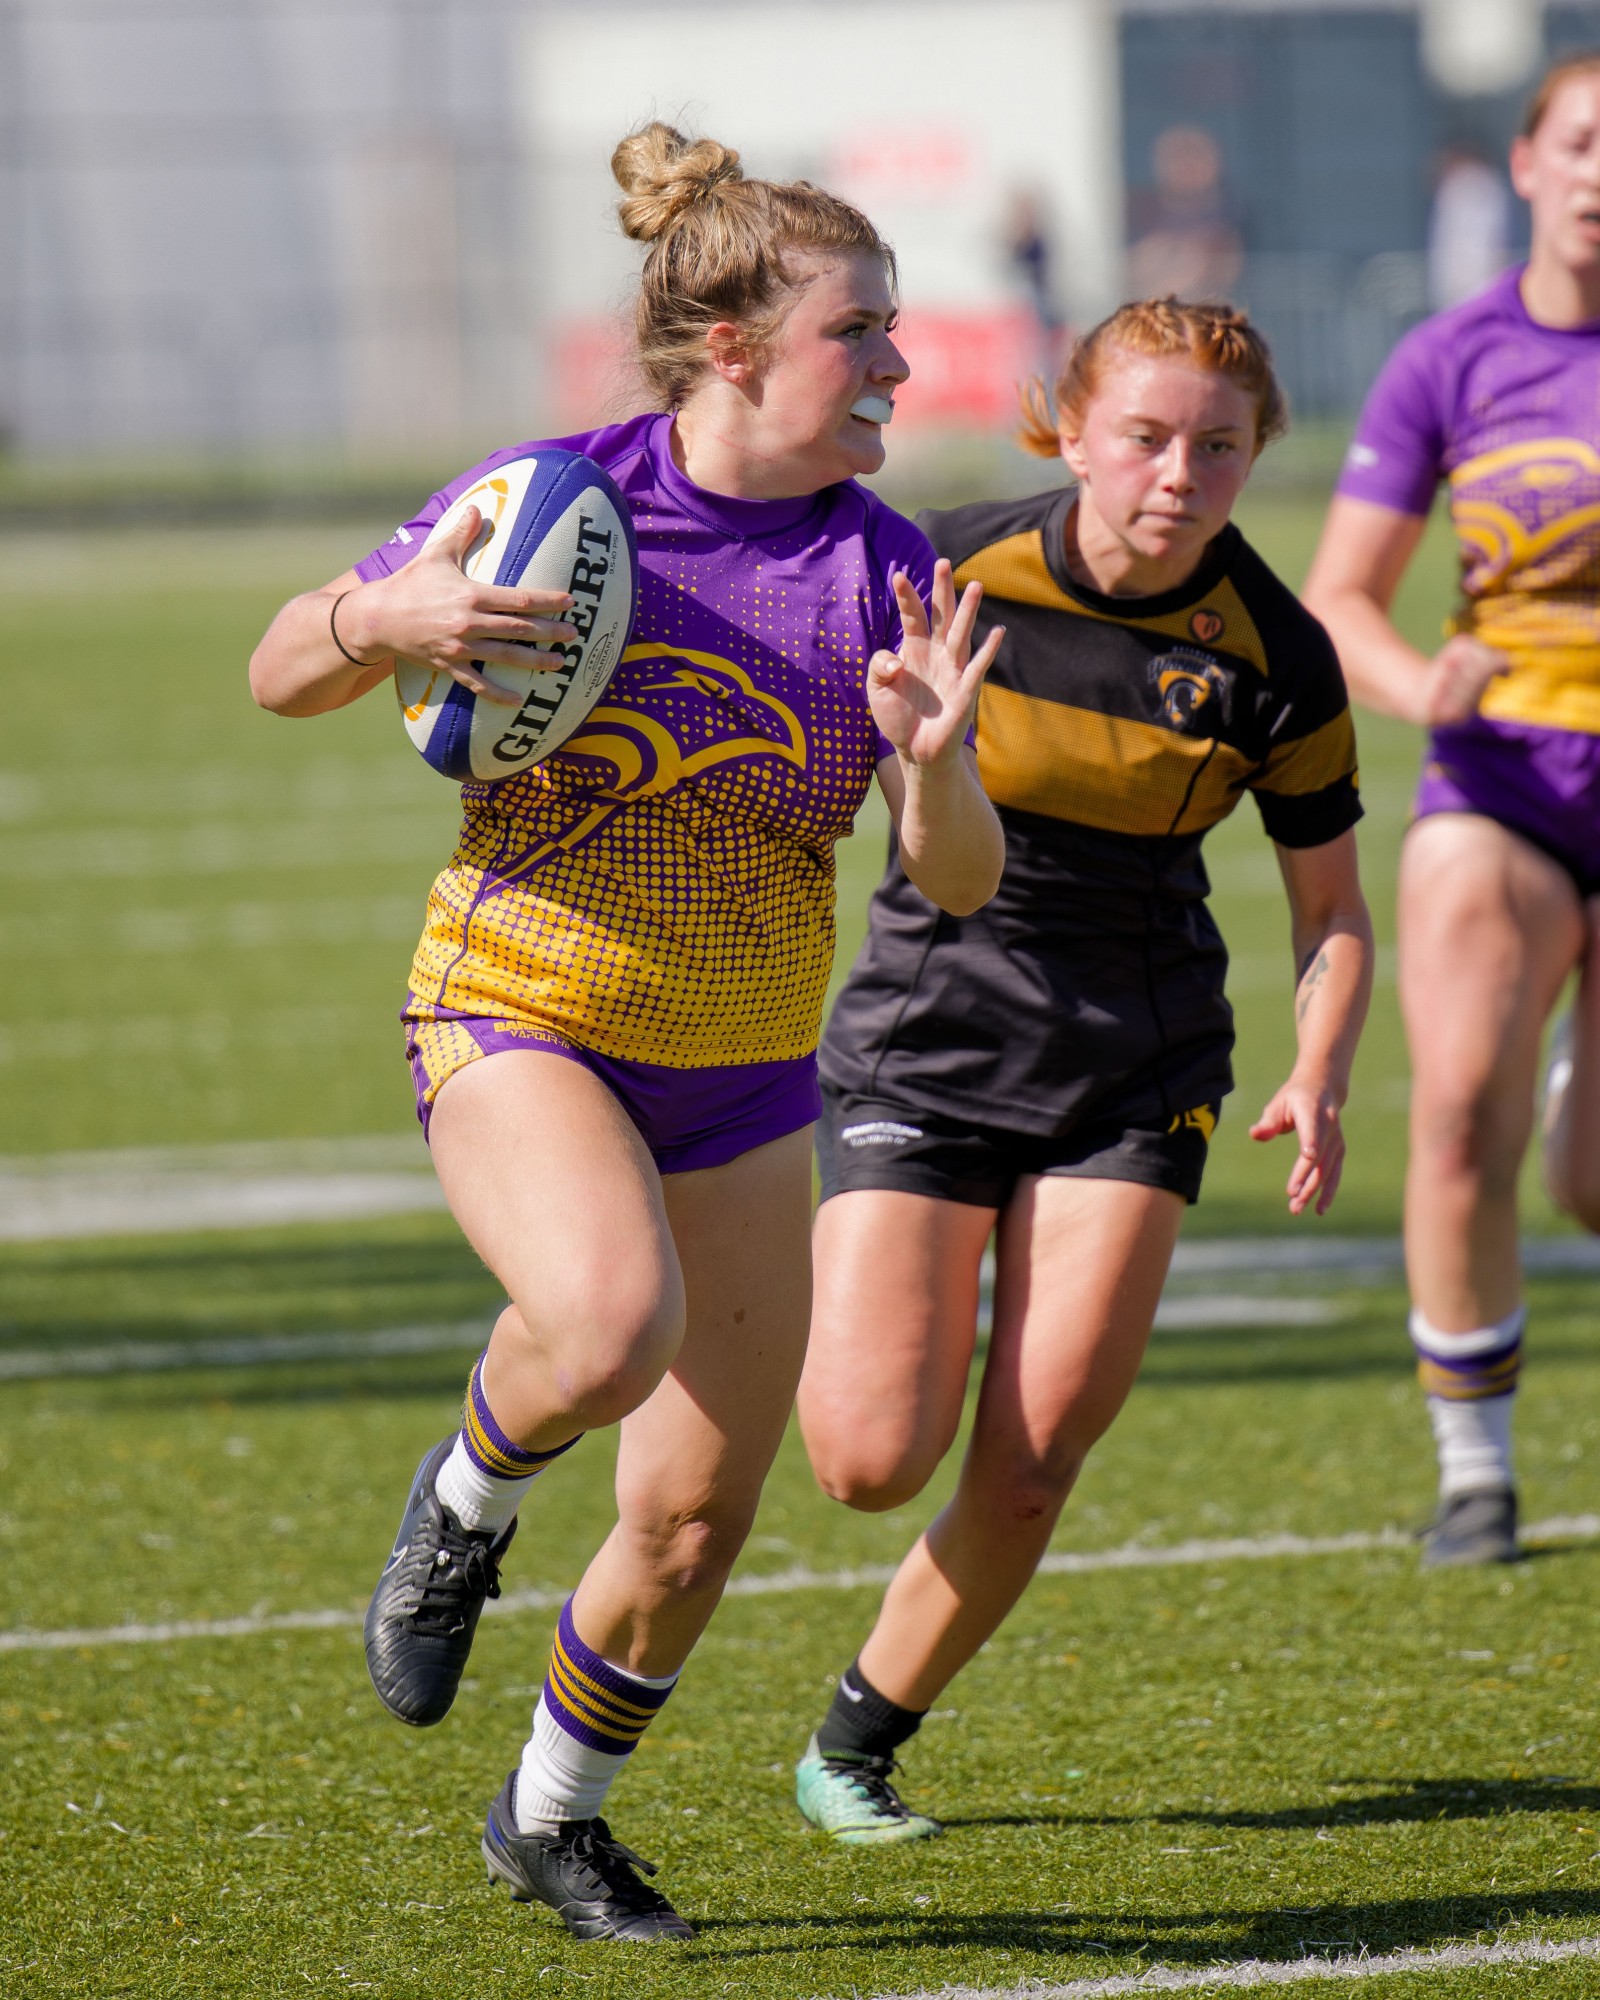 Laurier women's rugby player running with the ball